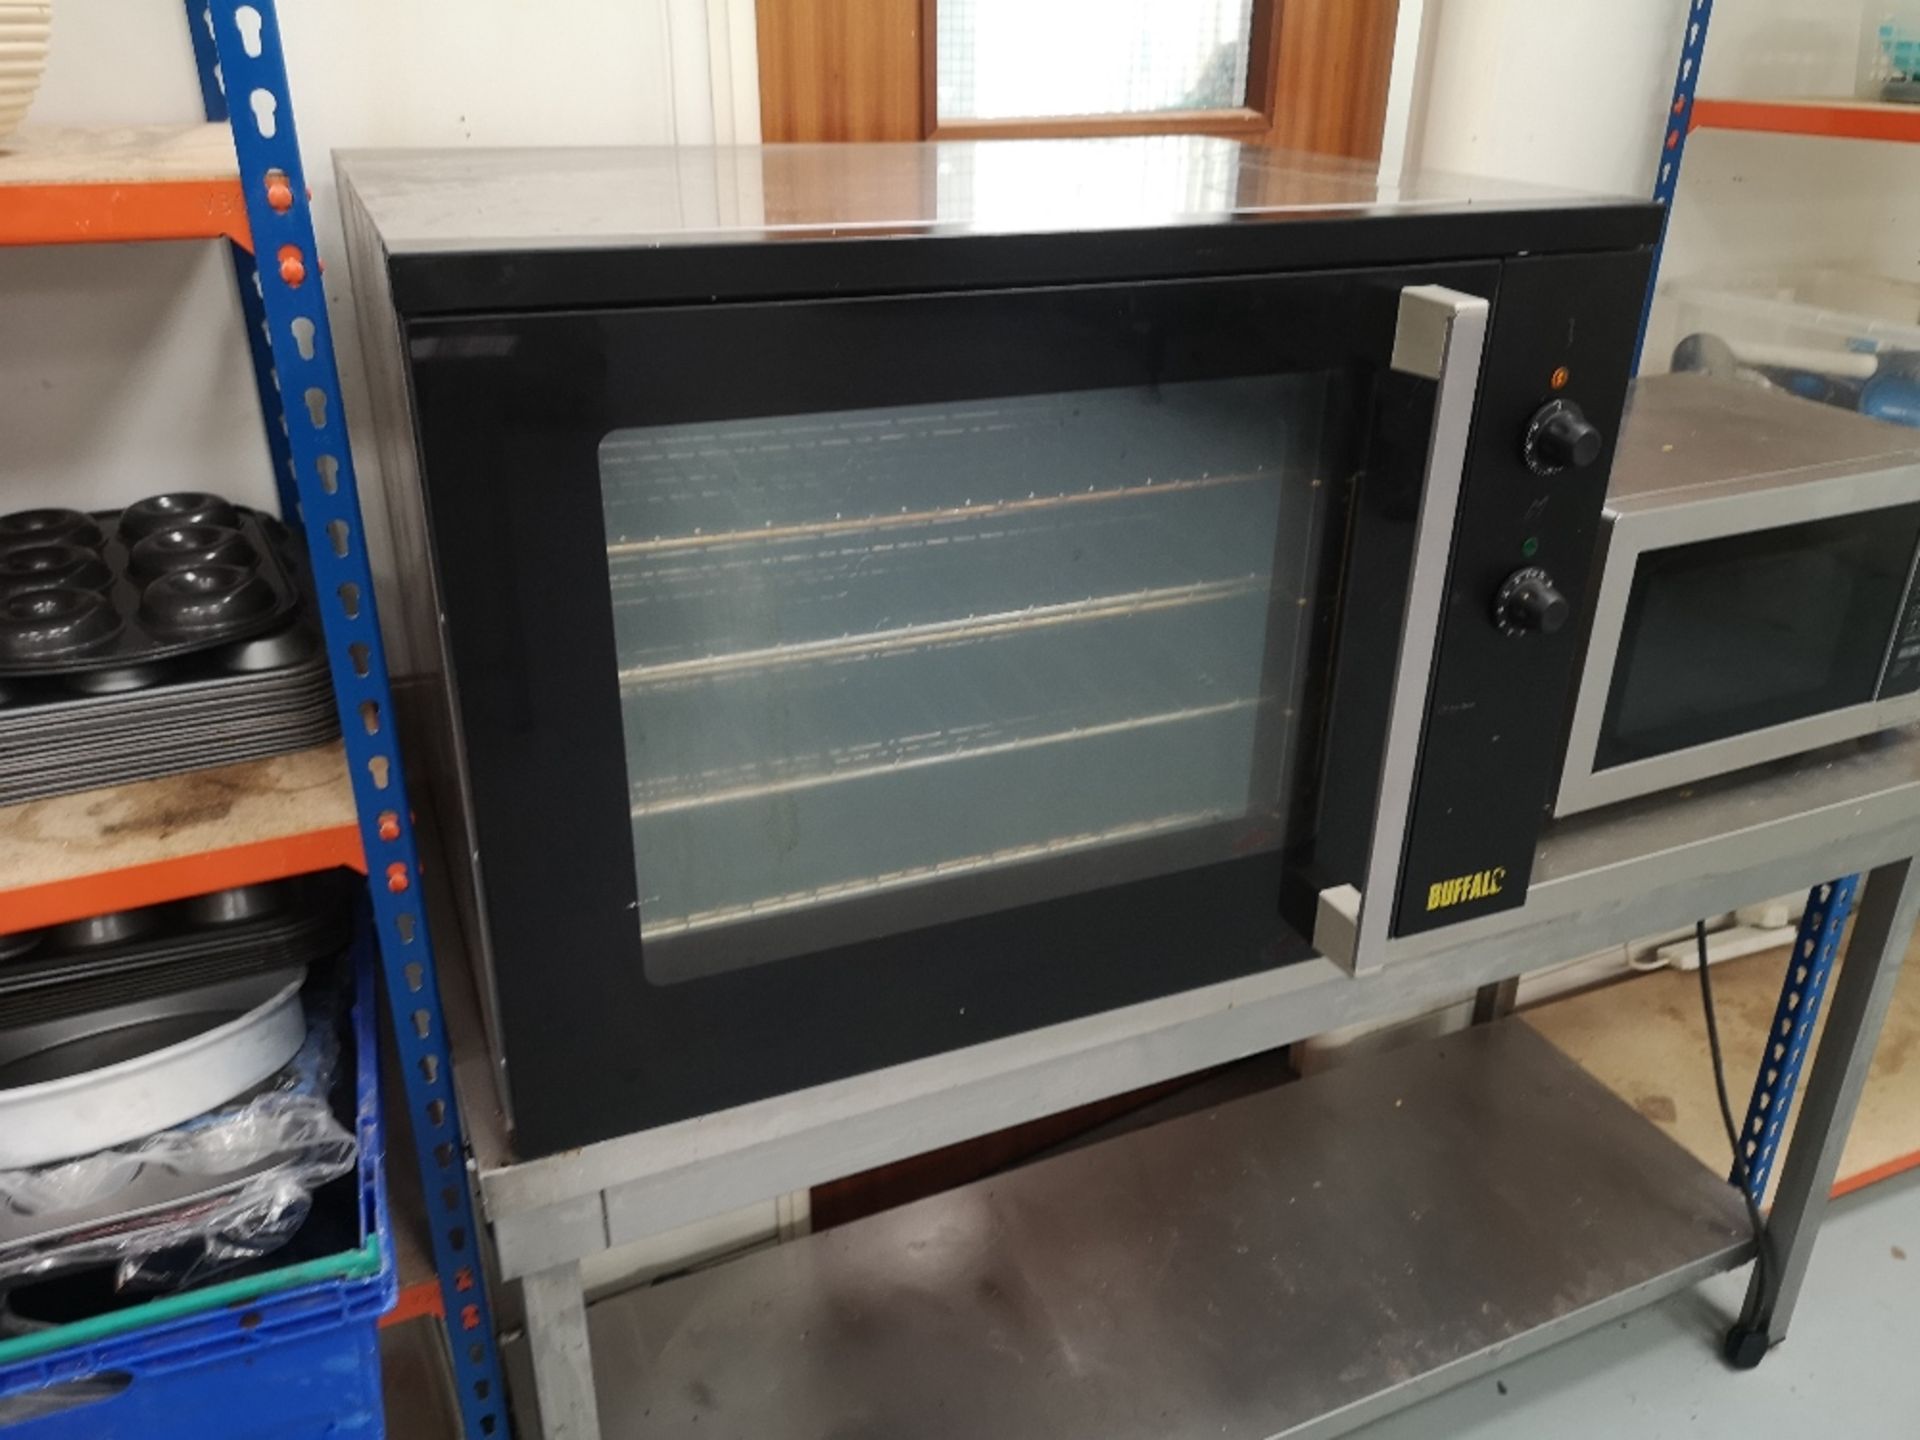 Buffalo GD278 100Ltr Convection Oven - Image 3 of 6